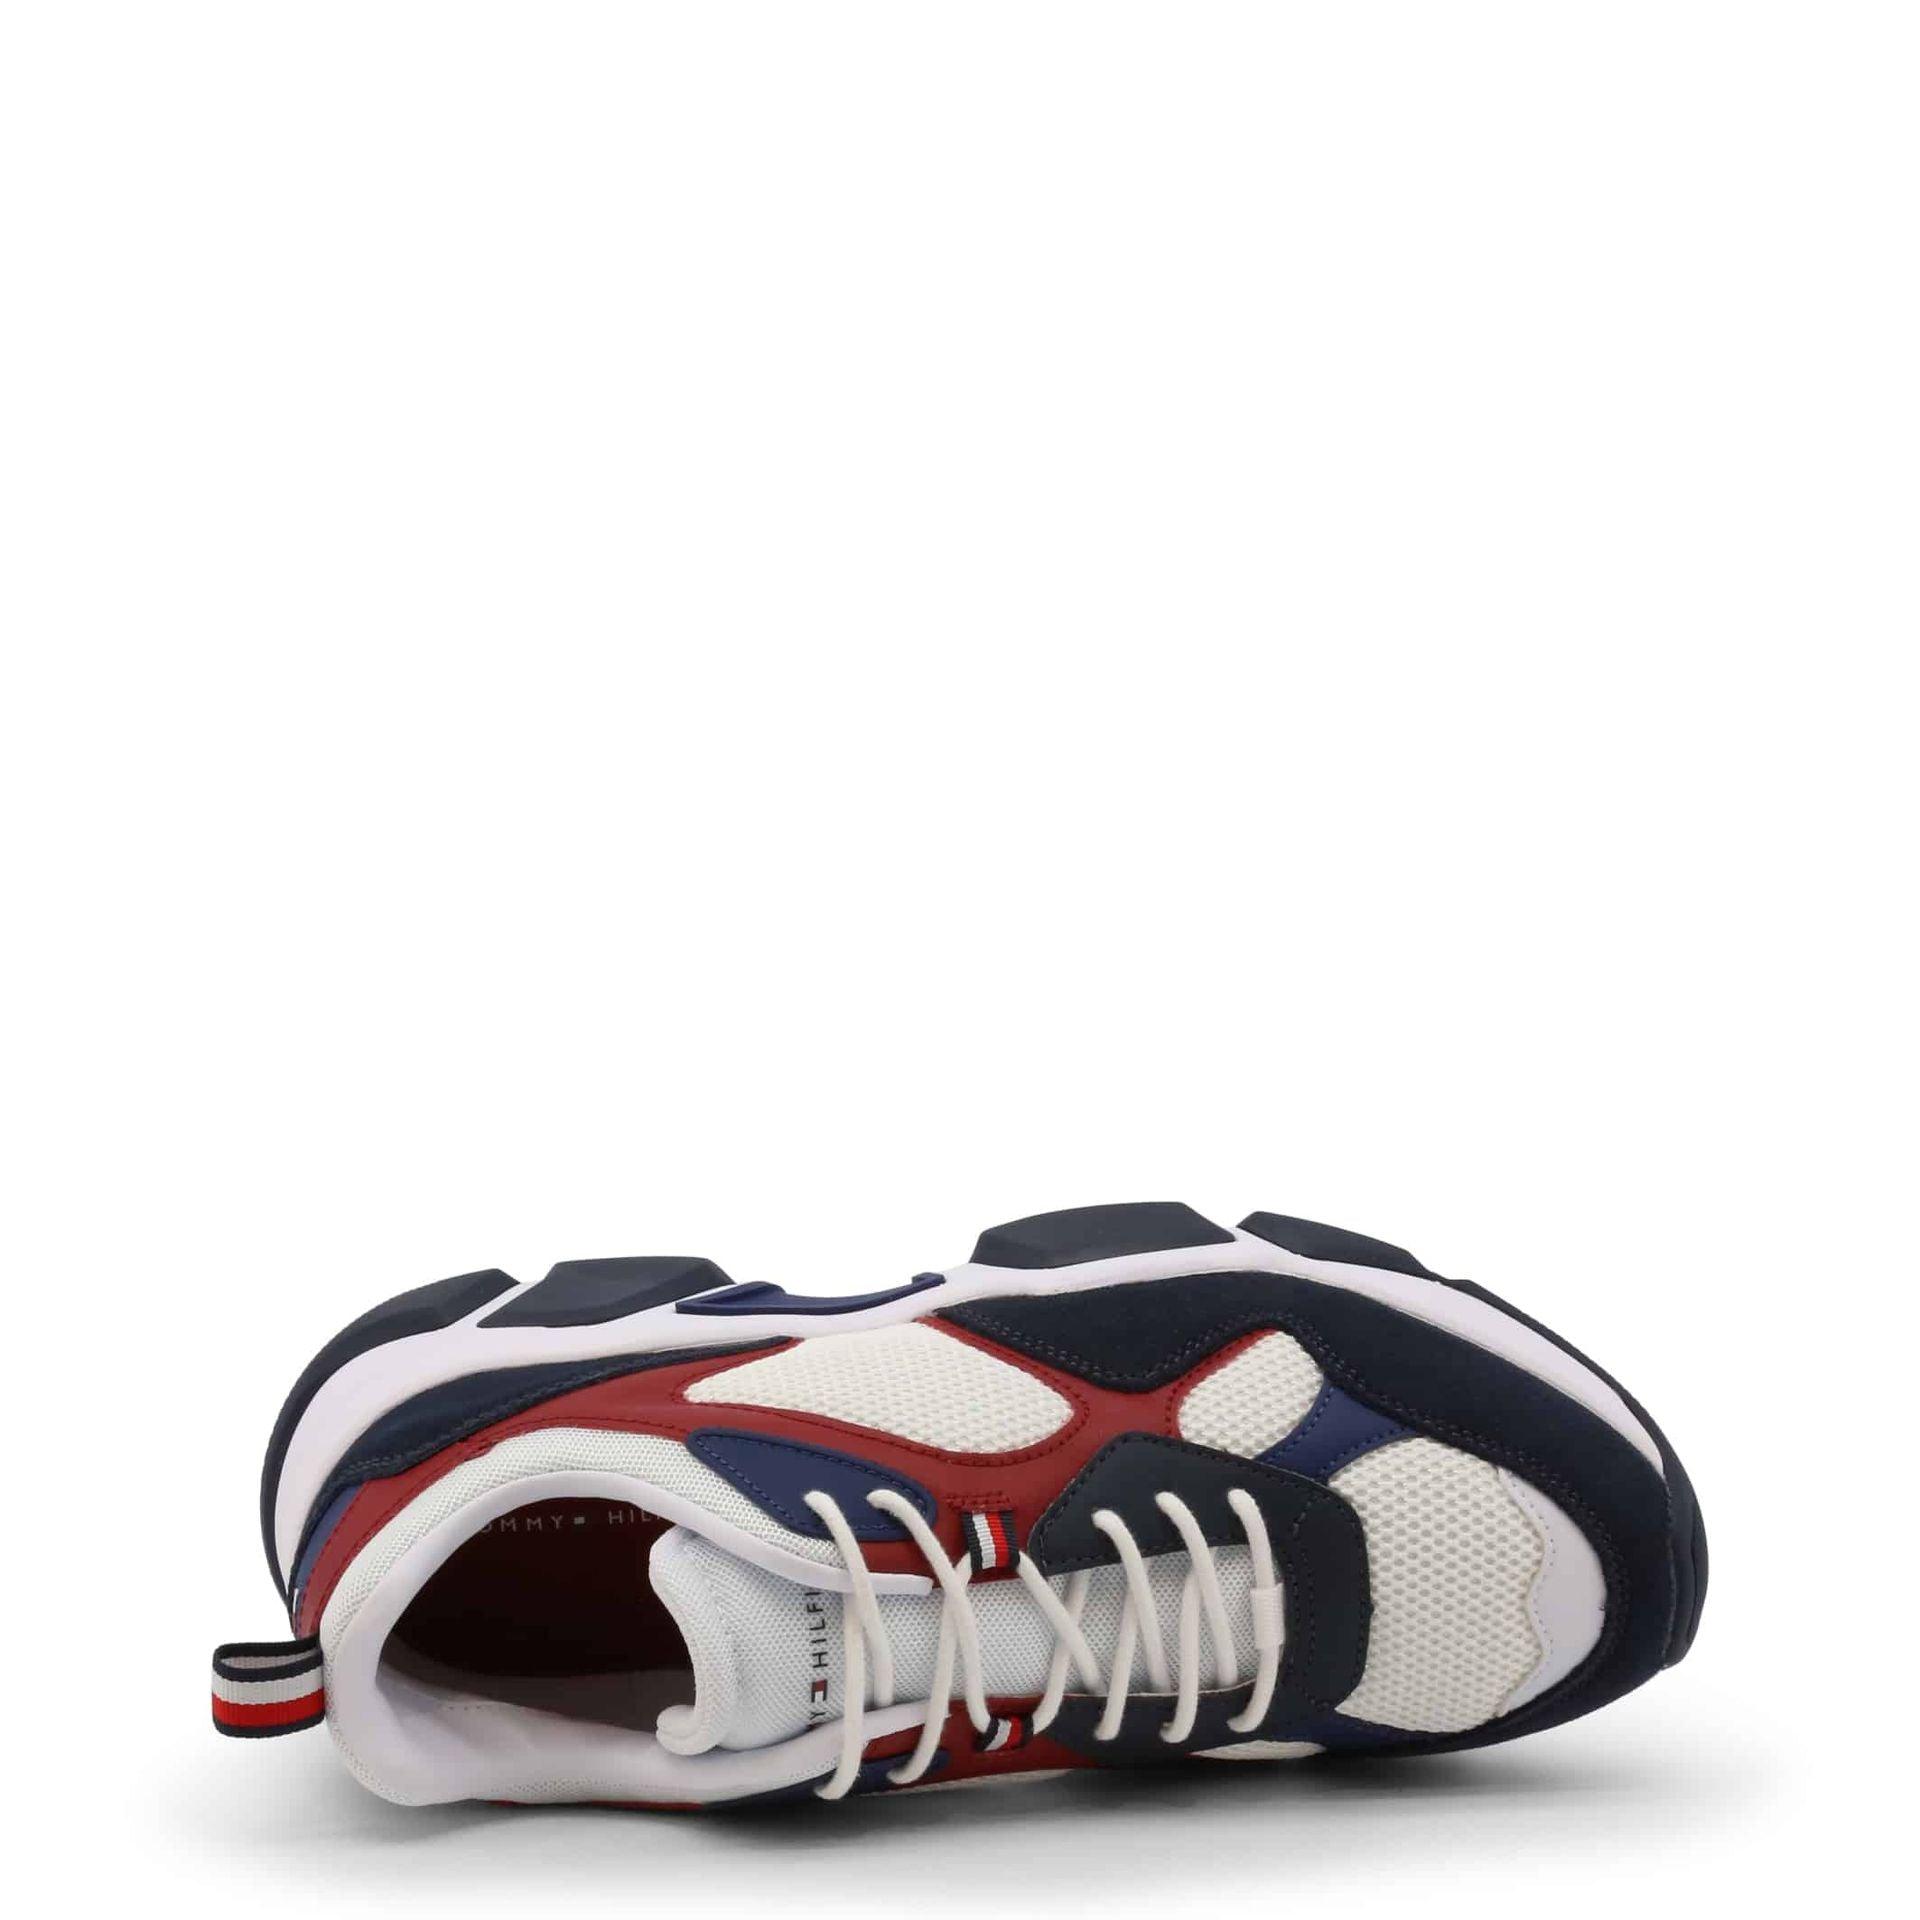 Men Sneakers - Tommy Hilfiger Sneakers Shoes - Trainers - Sneakers - Guocali